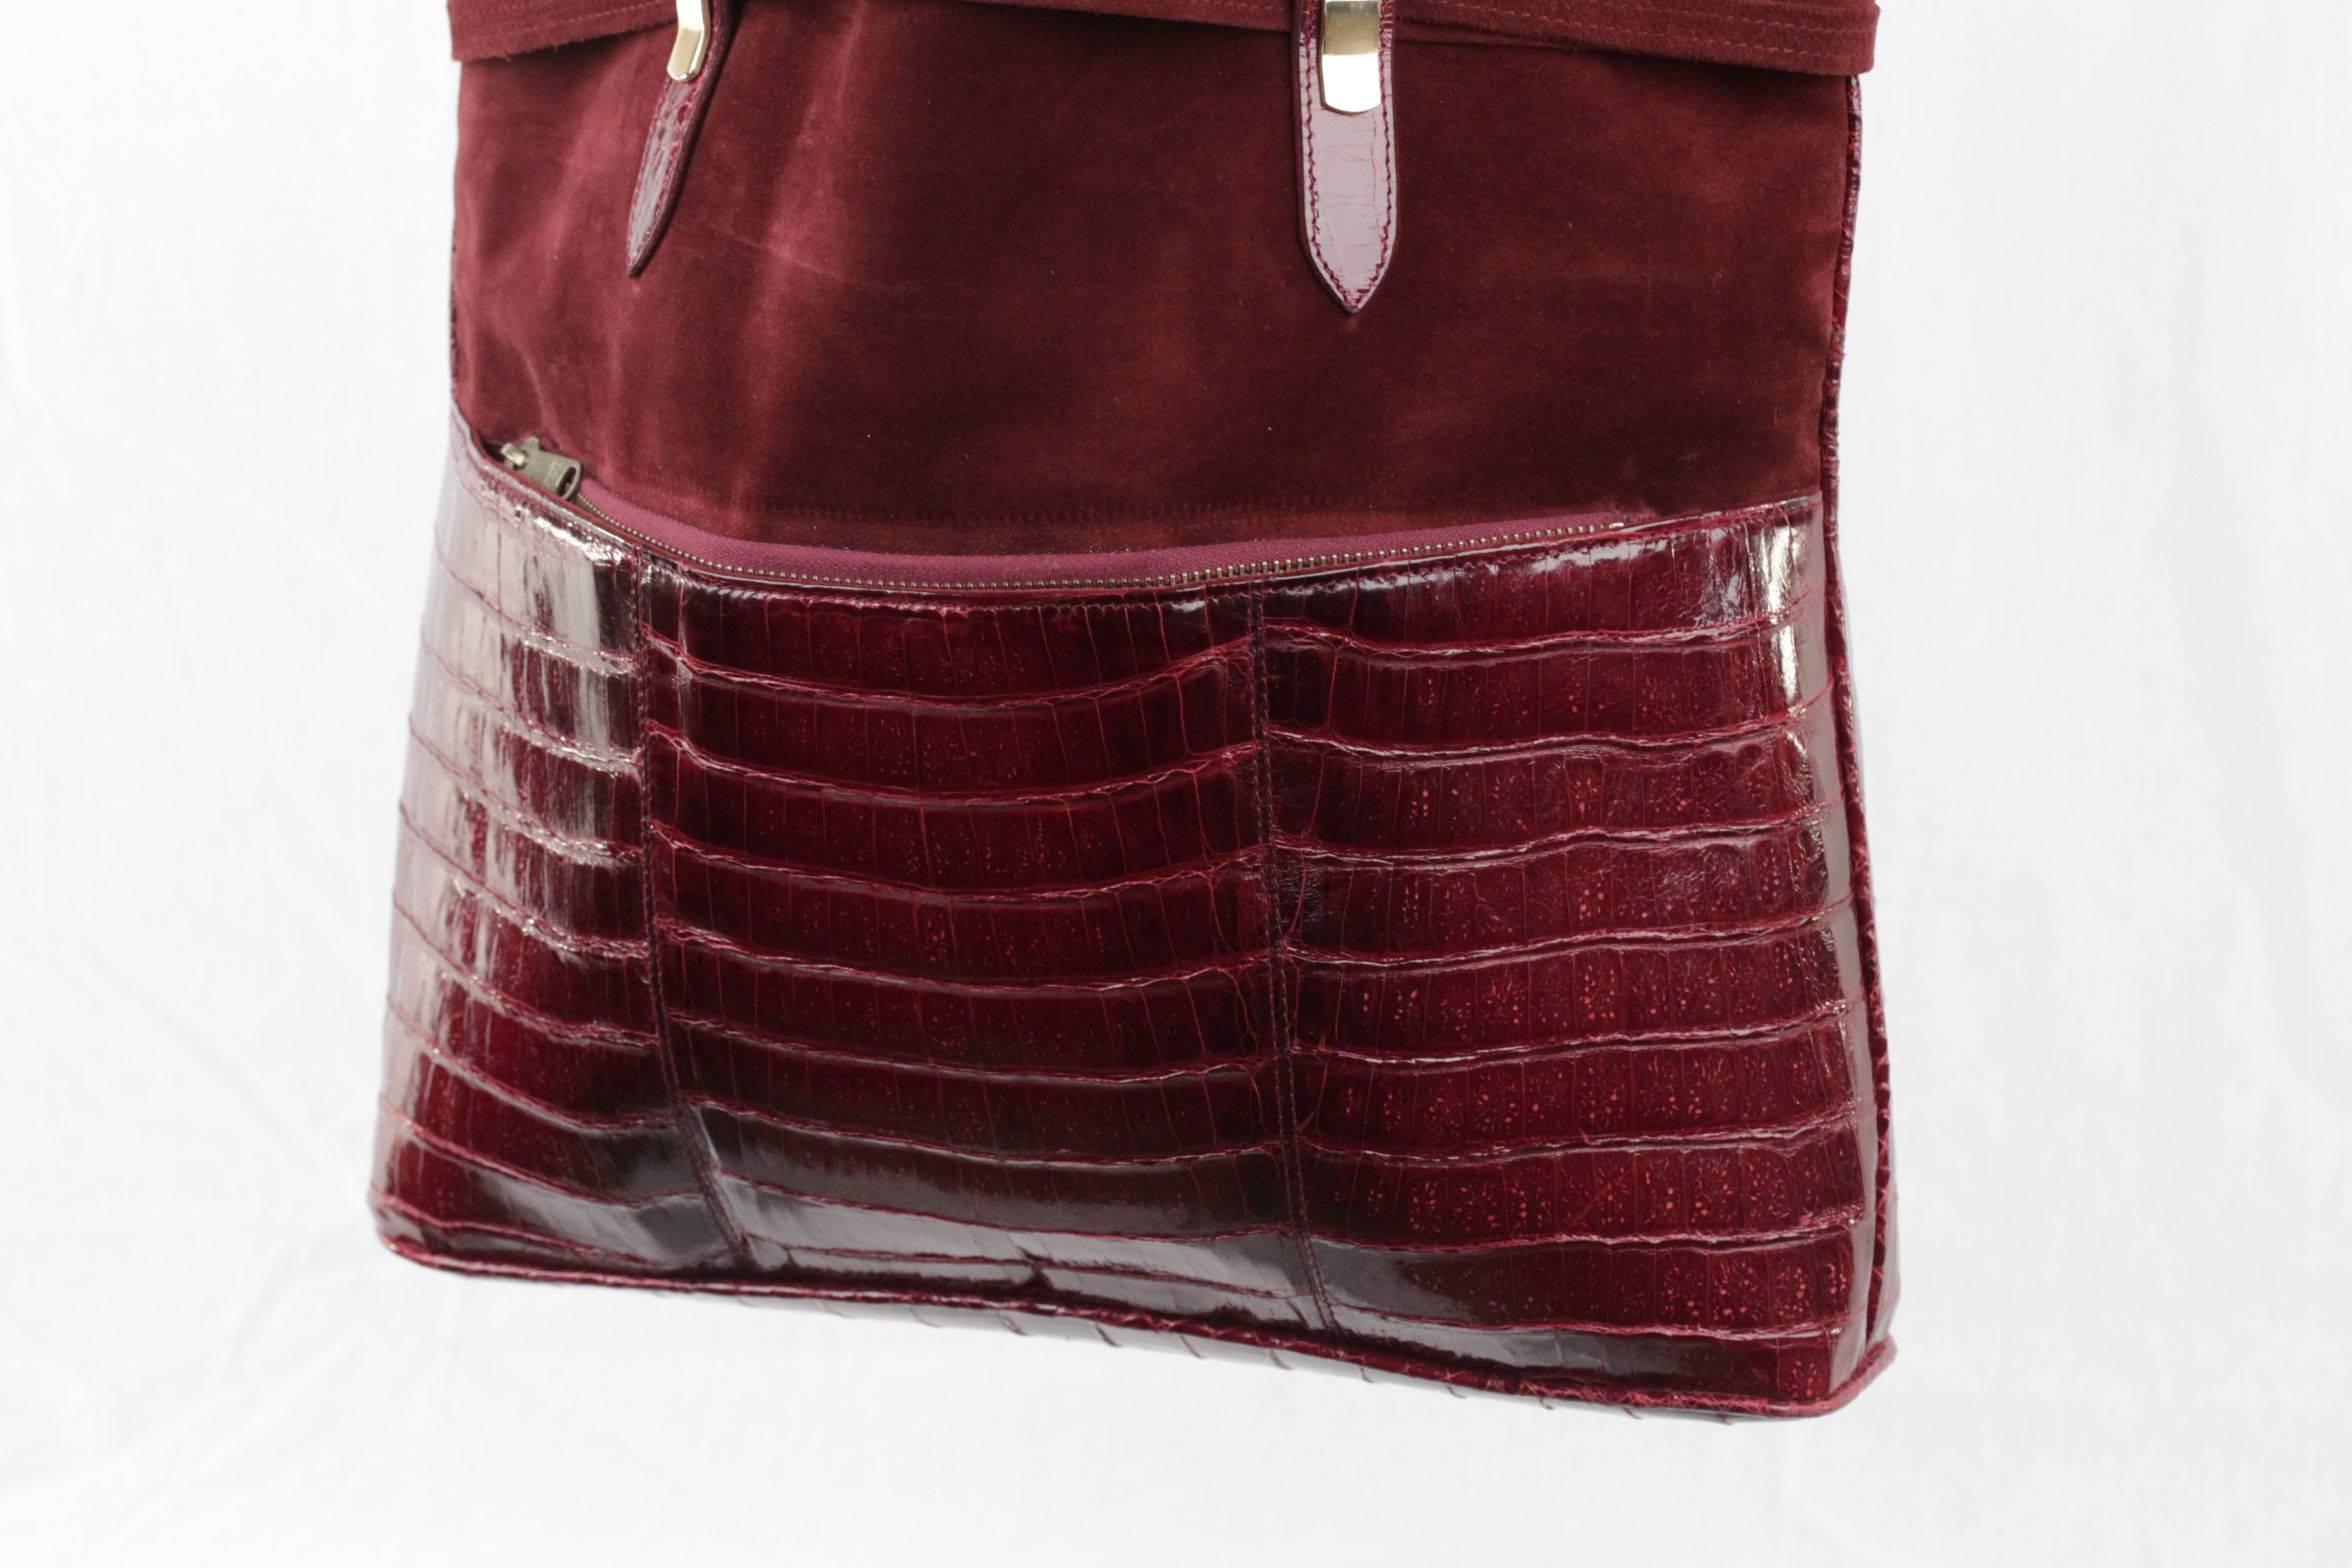  - Vintage shopping bag crafted in suede & crocodile
- Burgundy color
- Gold metal ardwarer
- 2 exterior zip pockets (one on the front and one on the back)
- Burgundy leather lining
- 2 side zip pockets on inside
- Approx. measurements: 15 1/2